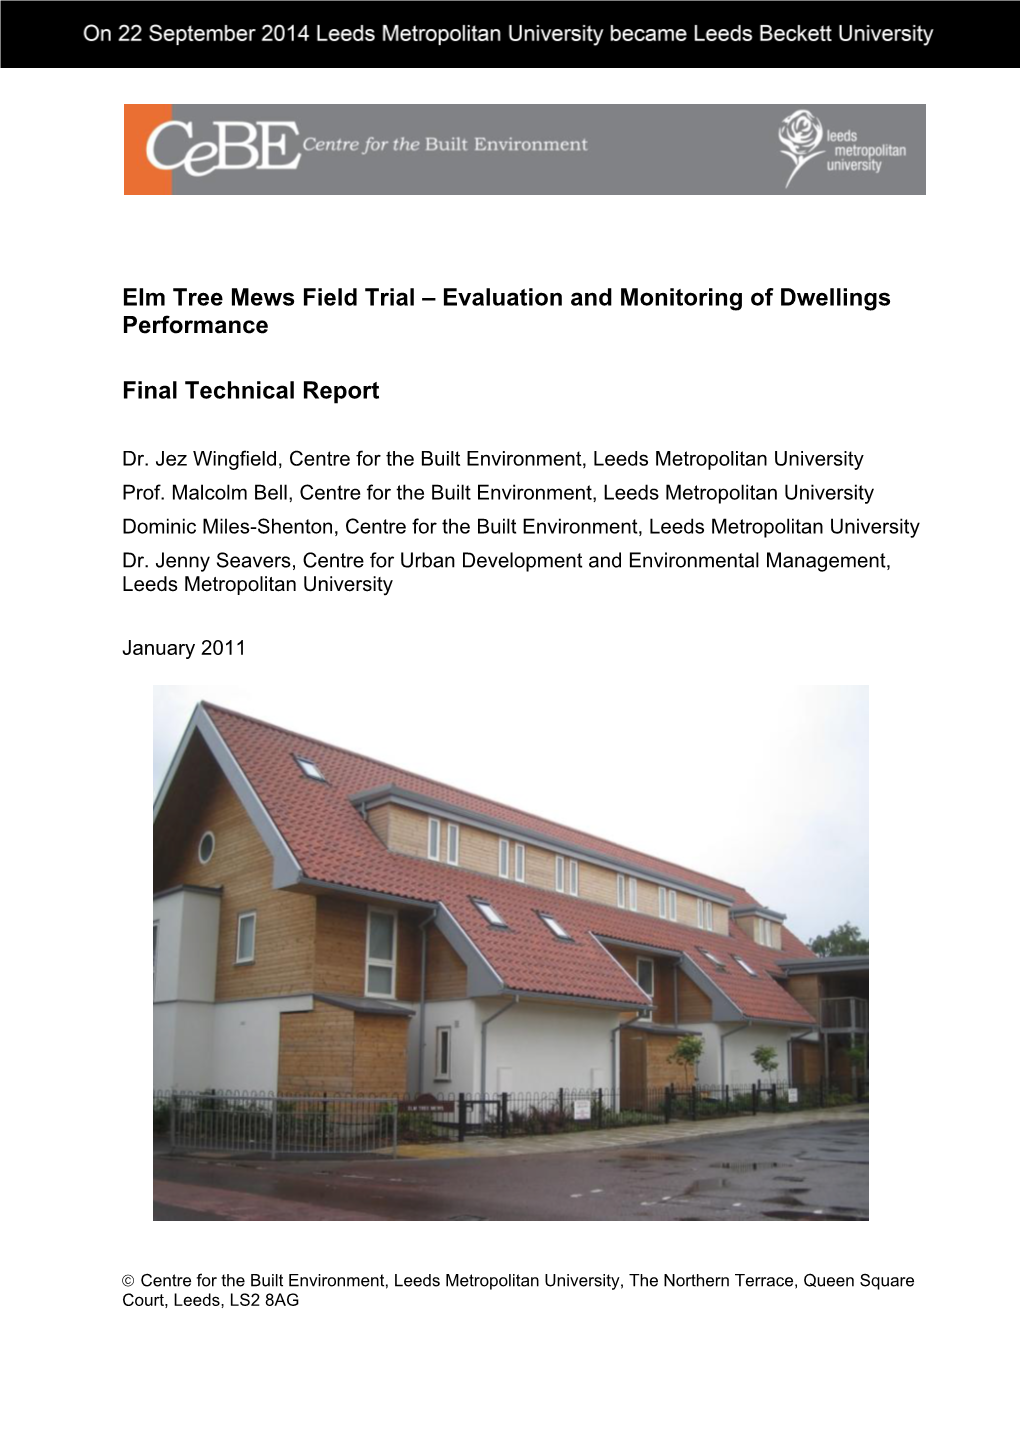 Elm Tree Mews Field Trial – Evaluation and Monitoring of Dwellings Performance